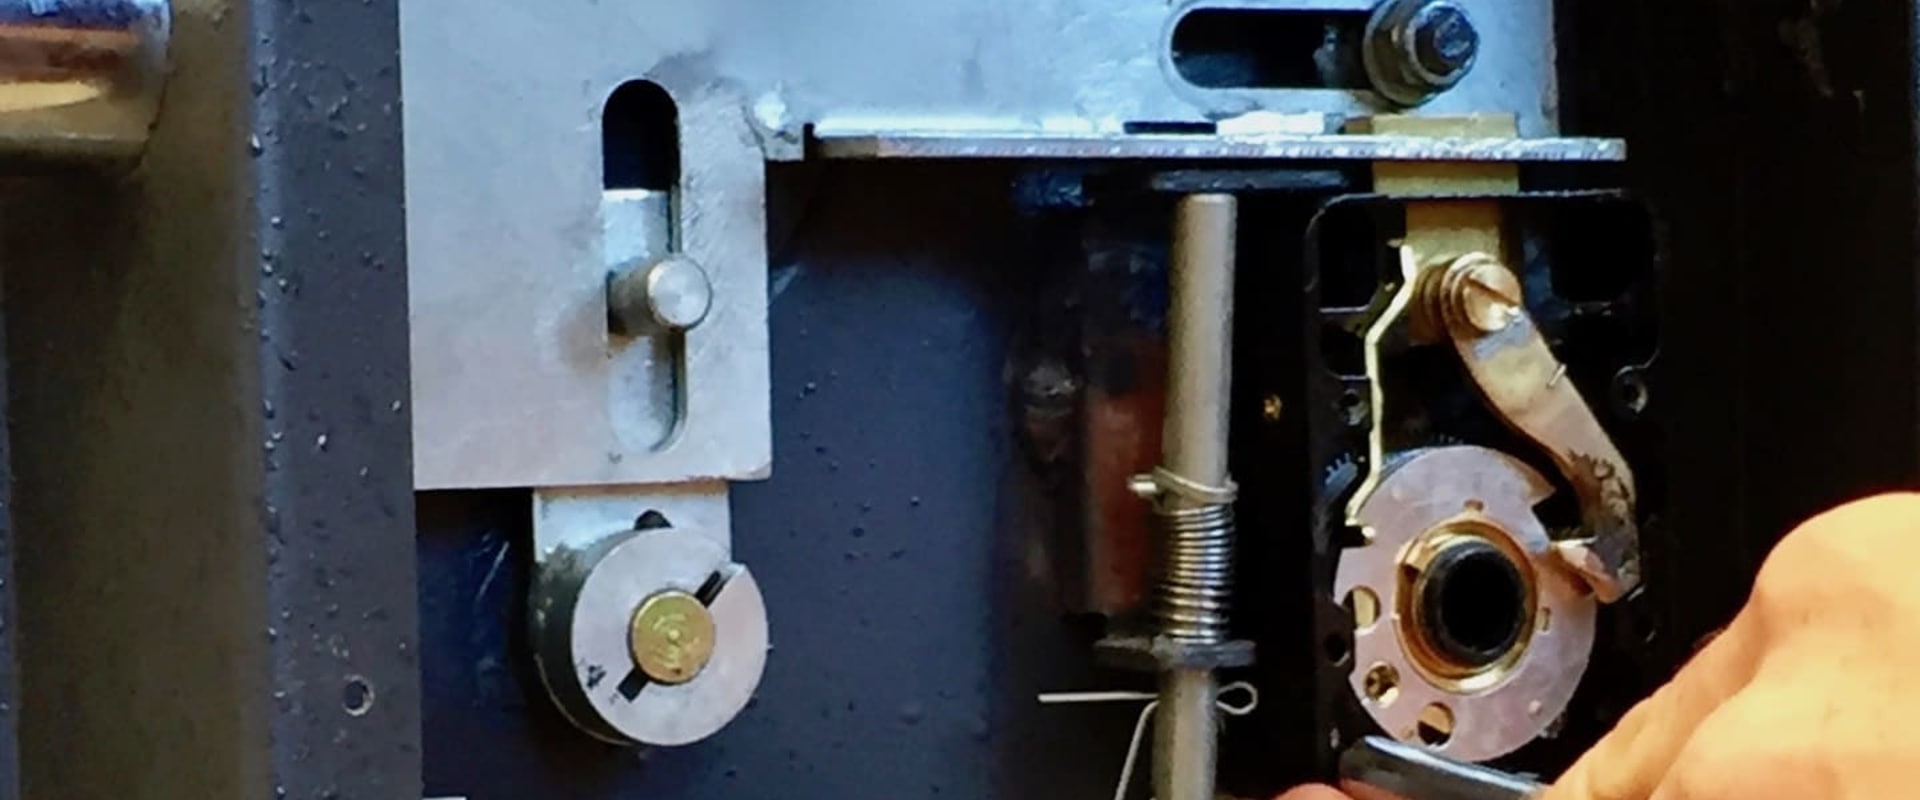 Can a Locksmith Reset a Safe?